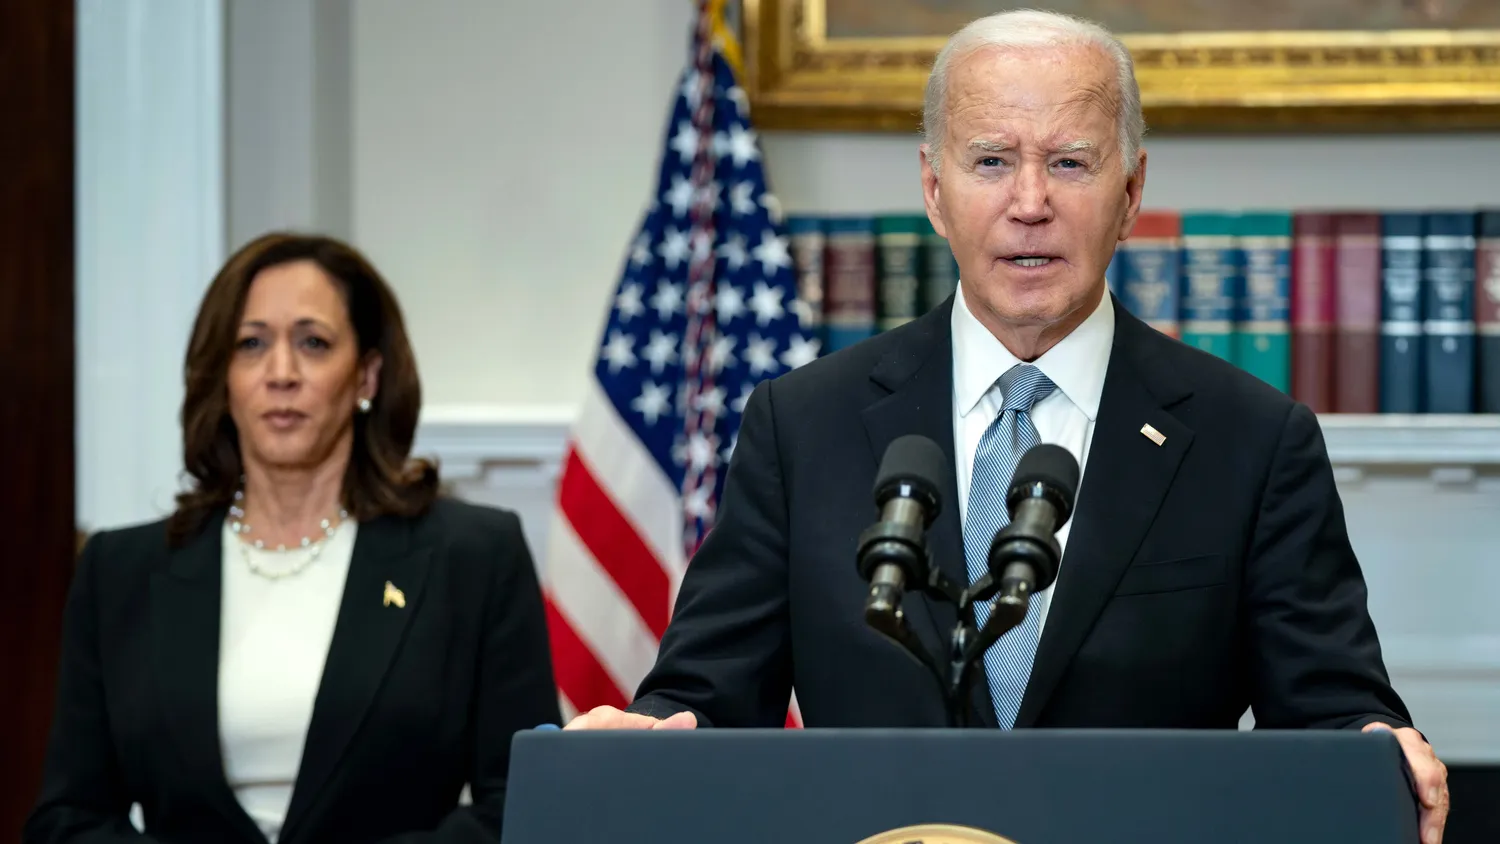 Biden is about to drop of Presidential Race, 'We're close to the end'